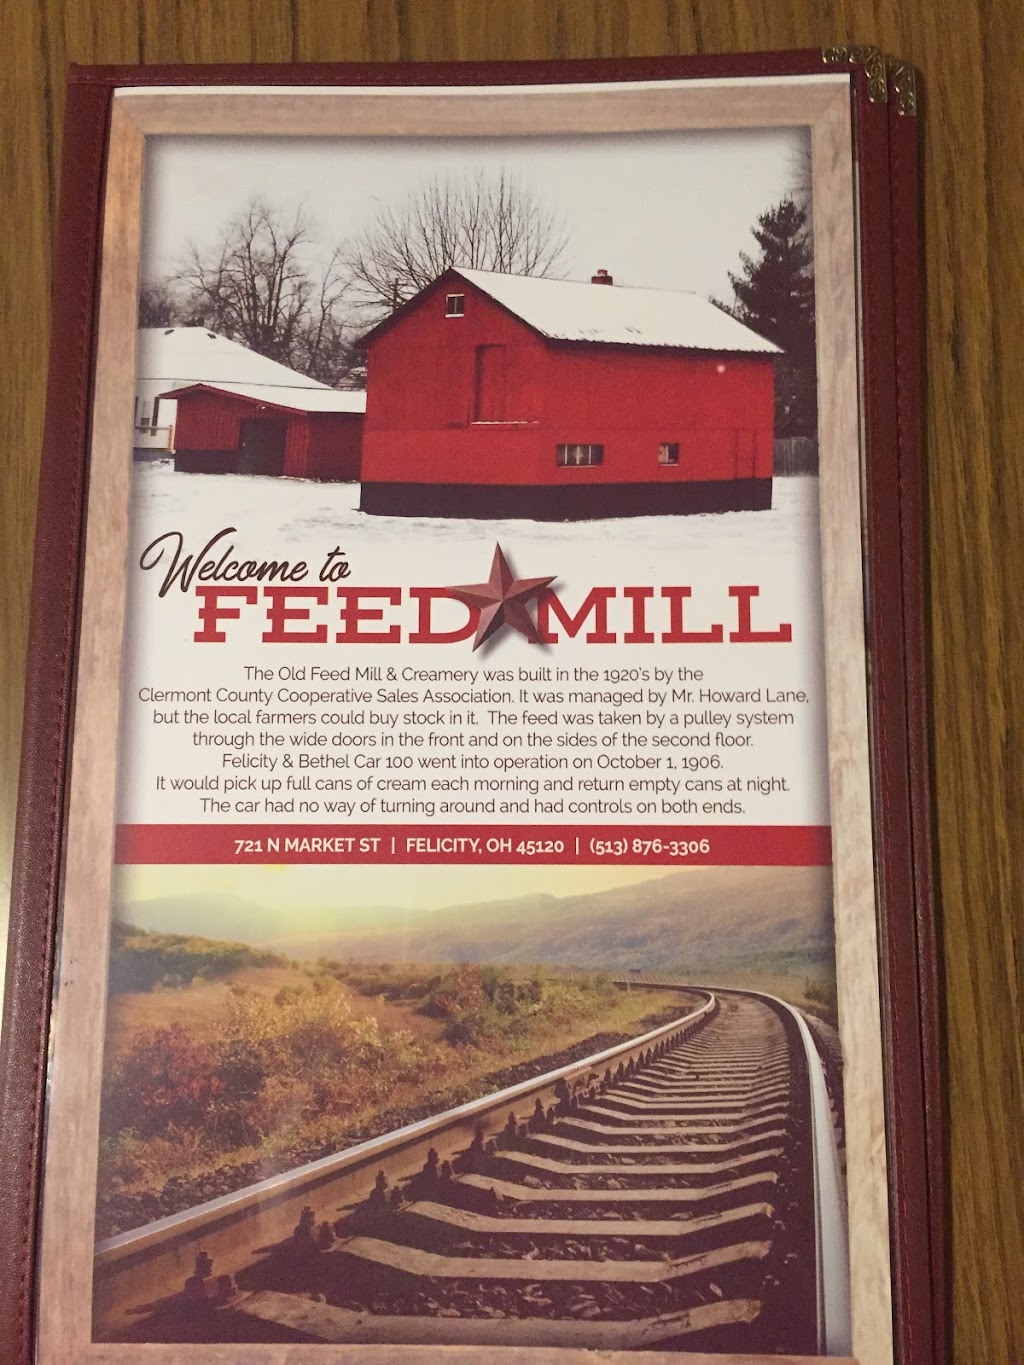 Feed Mill Restaurant & Pizza | 721 N Market St, Felicity, OH 45120 | Phone: (513) 876-3306